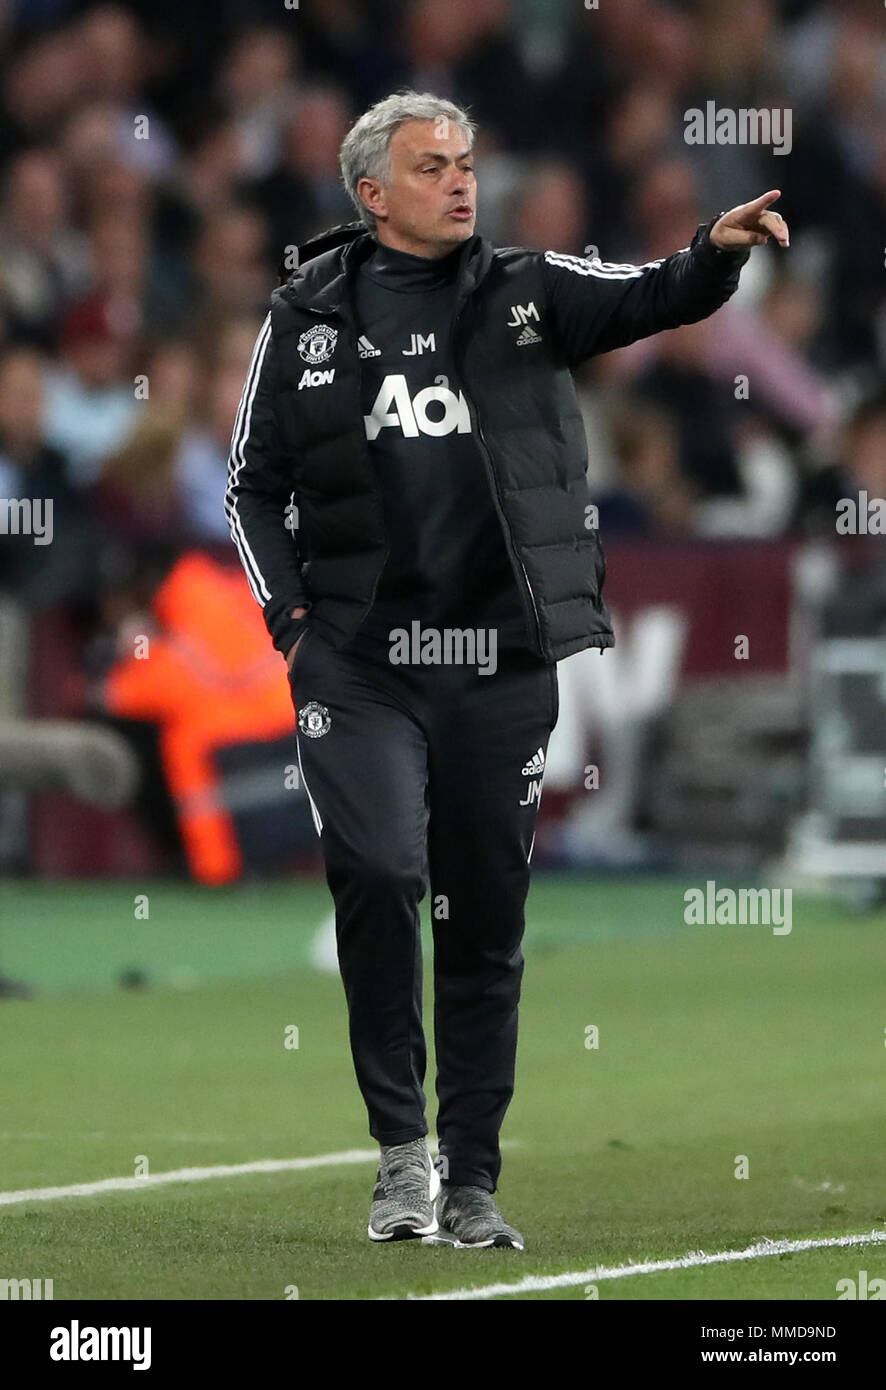 Manchester United manager Jose Mourinho during the Premier League match at London Stadium. PRESS ASSOCIATION Photo. Picture date: Thursday May 10, 2018. See PA story SOCCER West Ham. Photo credit should read: Nick Potts/PA Wire. RESTRICTIONS: No use with unauthorised audio, video, data, fixture lists, club/league logos or 'live' services. Online in-match use limited to 75 images, no video emulation. No use in betting, games or single club/league/player publications. Stock Photo